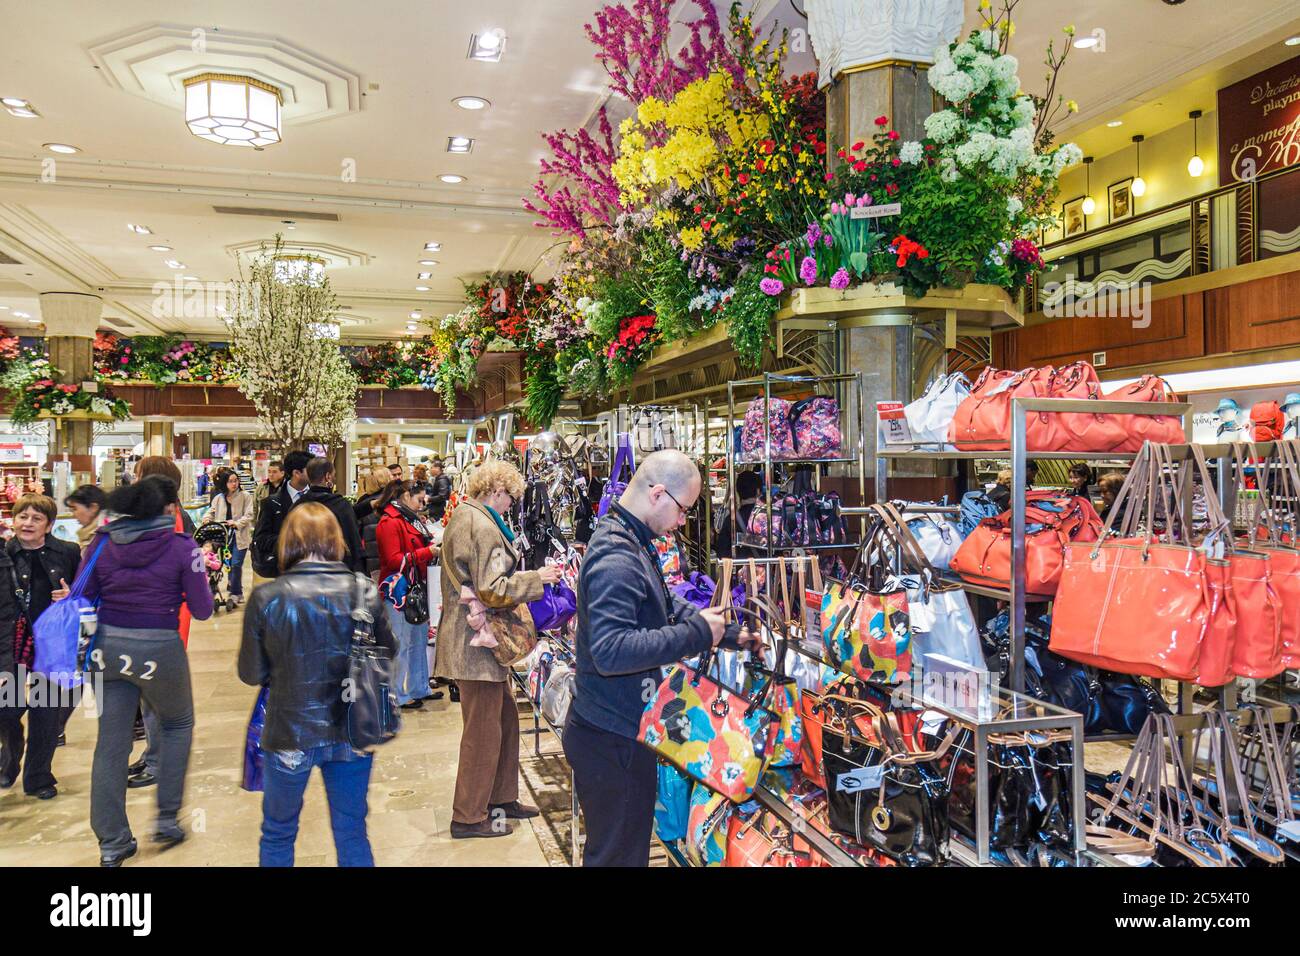 New York,New York City,NYC,Manhattan,Midtown,34th Street,Macy's,retail chain,Herald Square,department store,Flower Show,shopping shopper shoppers shop Stock Photo